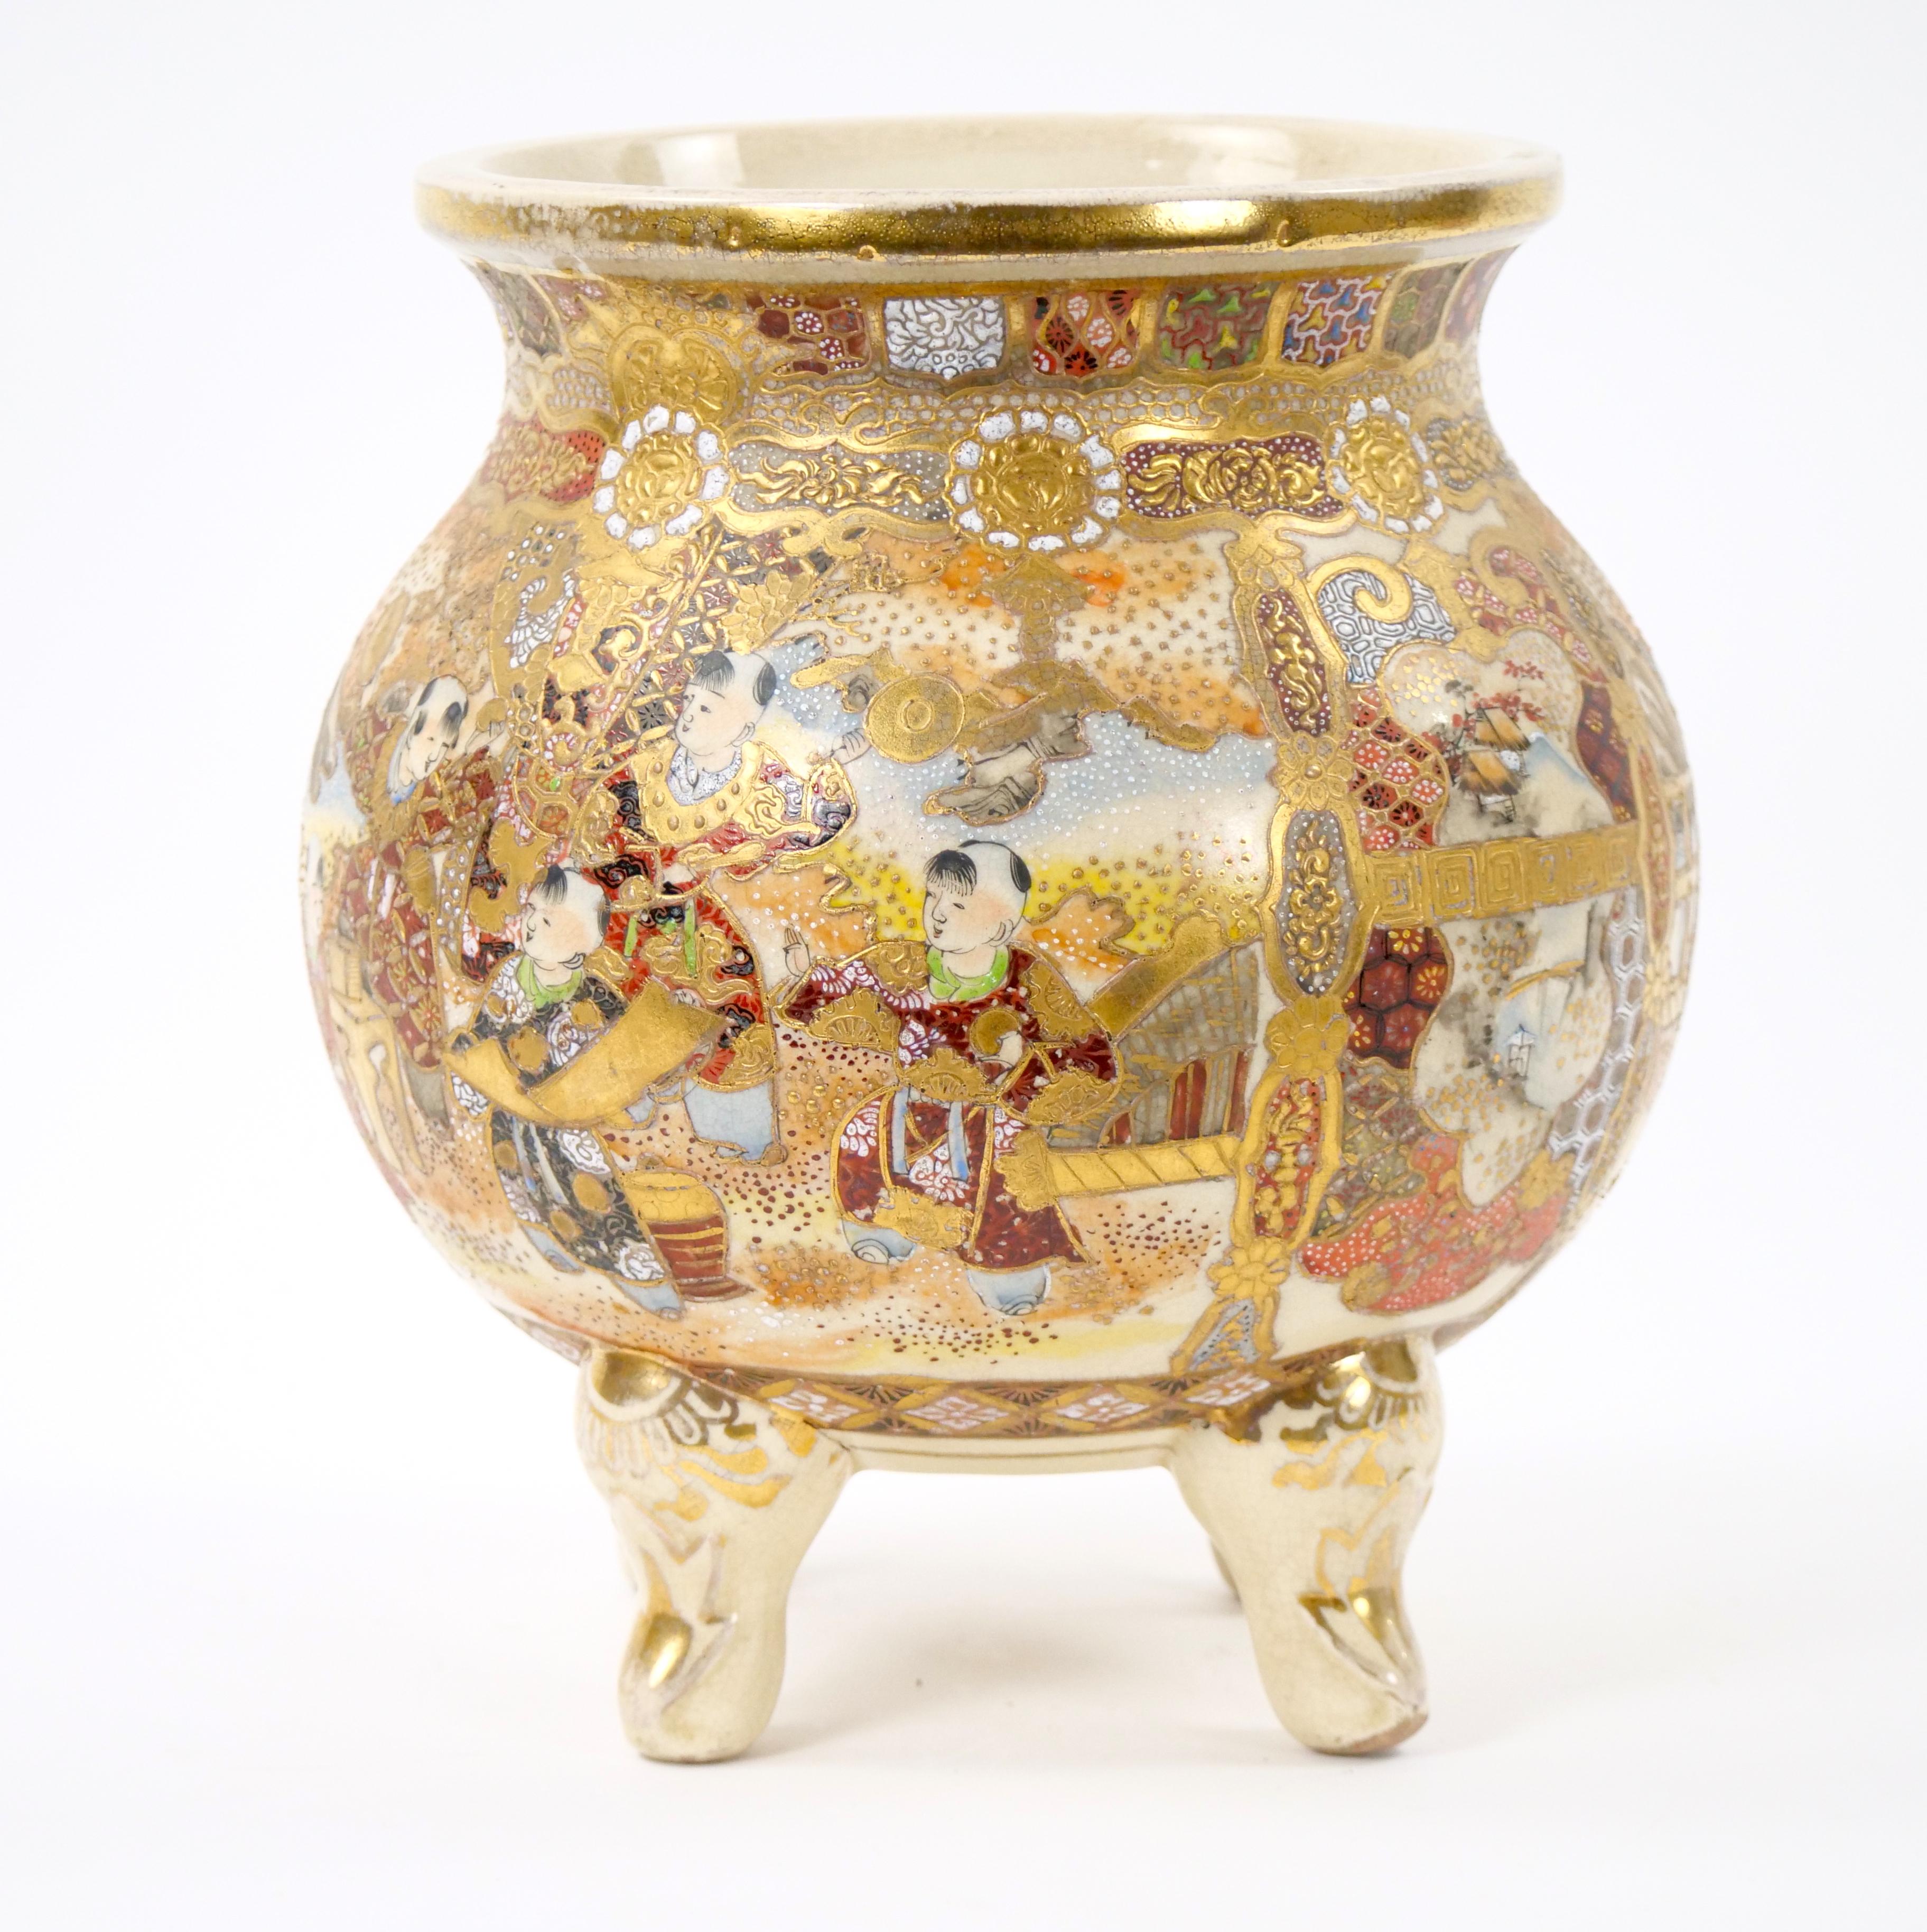 Step into the allure of the 19th century with this exquisite Hand-Painted and Gilt Footed Satsuma Vase. Meticulously crafted, this vase embodies the artistic finesse and cultural heritage of the era.
The hand-painted motifs on the vase are a